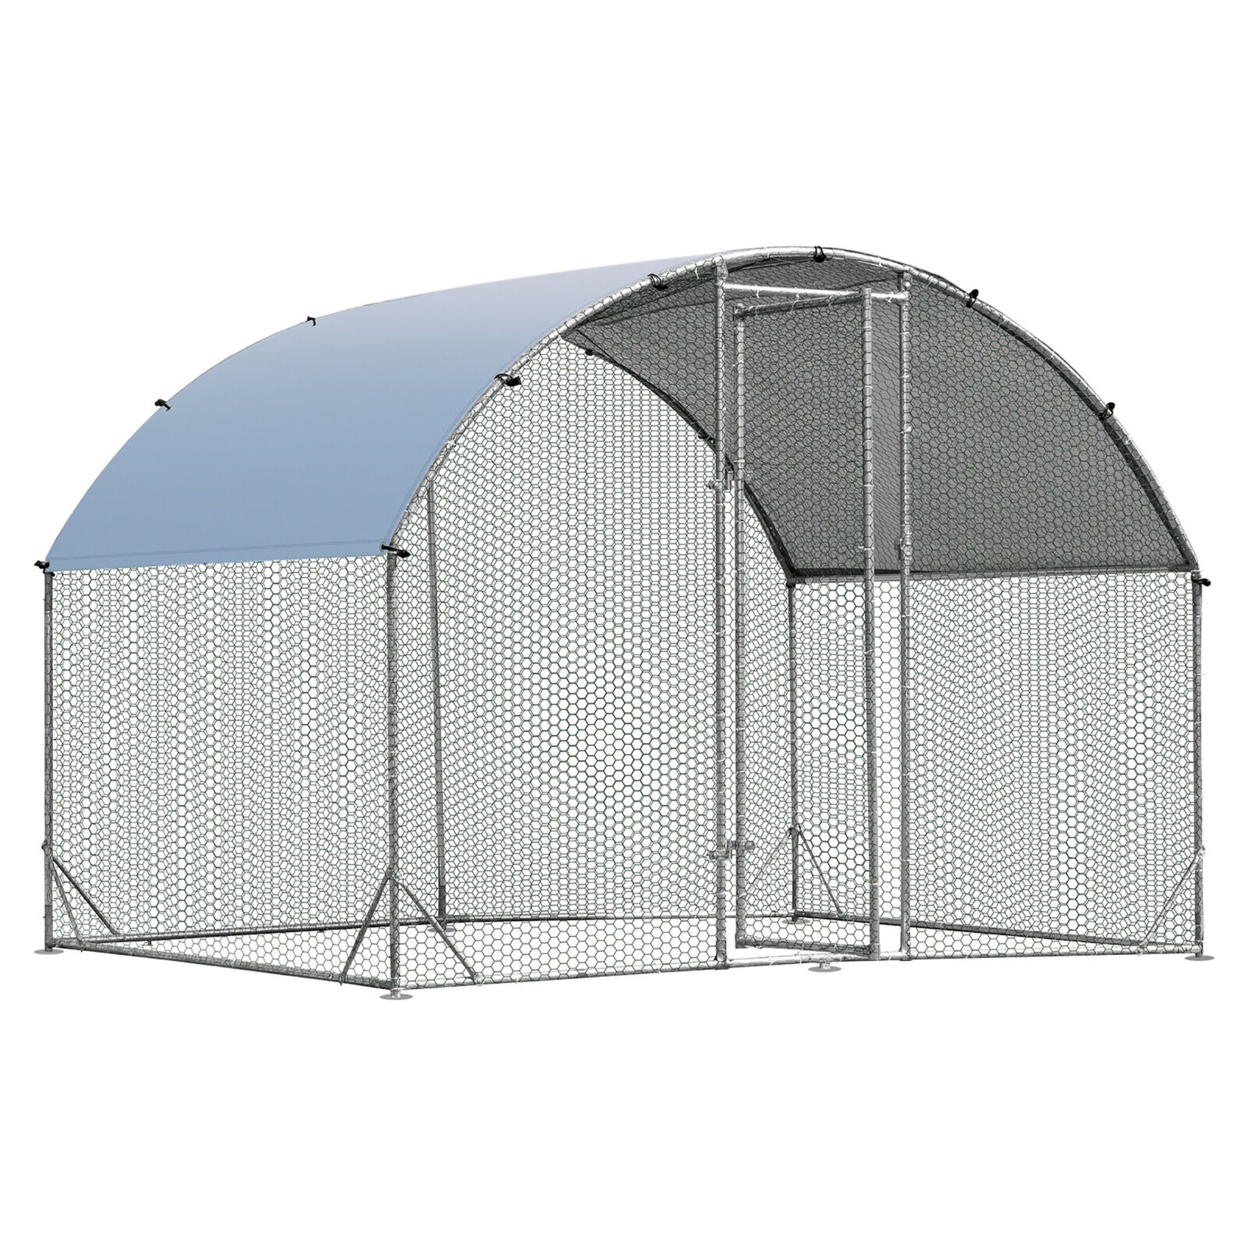 Large Metal Chicken Coop Outdoor Galvanized Dome Cage W/ Cover 9 Ft X 6.2 Ft